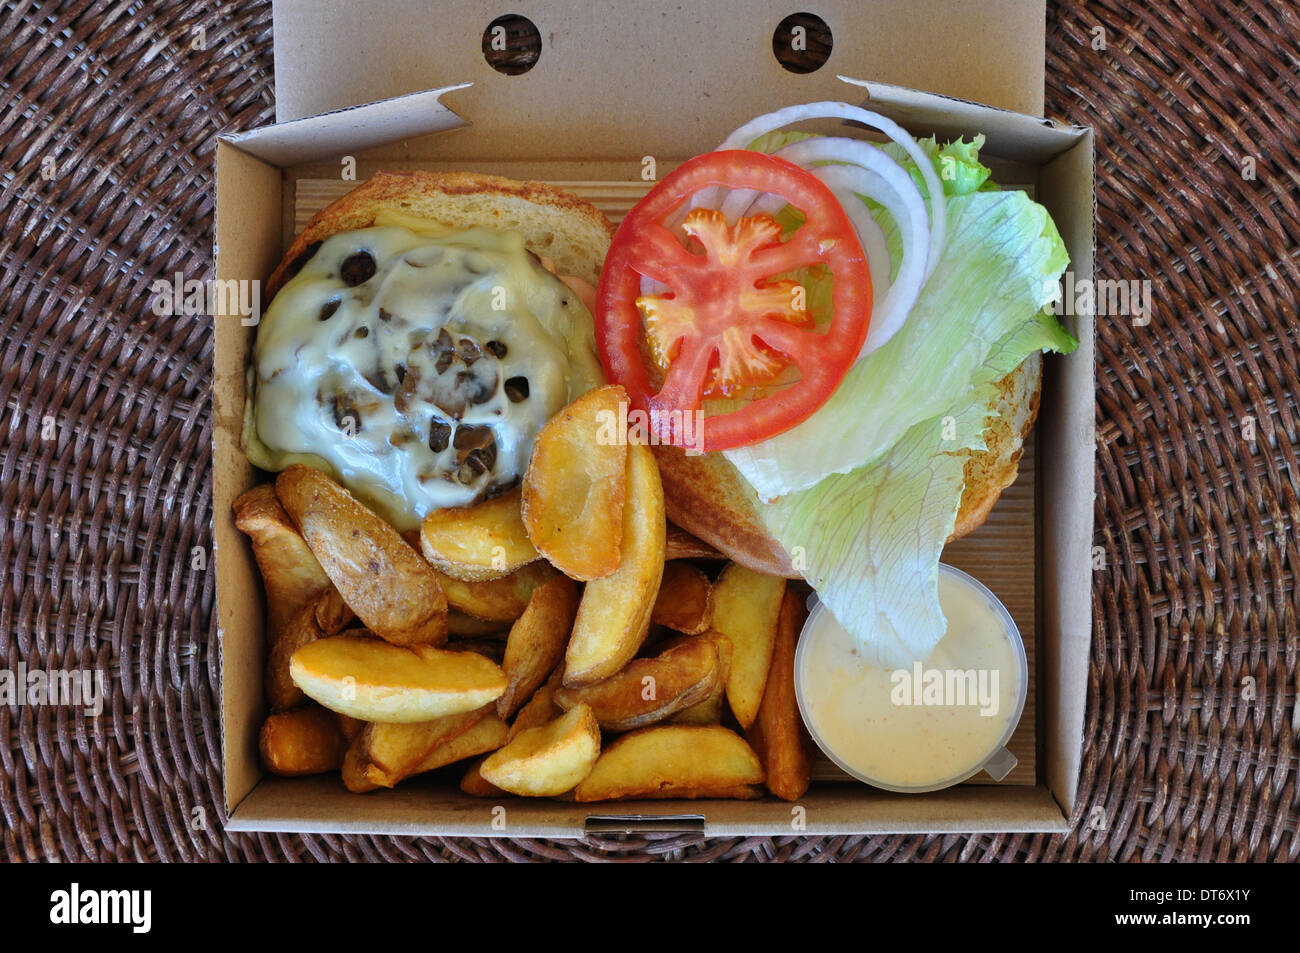 Burger with fries and melted cheese mushrooms. Takeaway food in packaging. Stock Photo